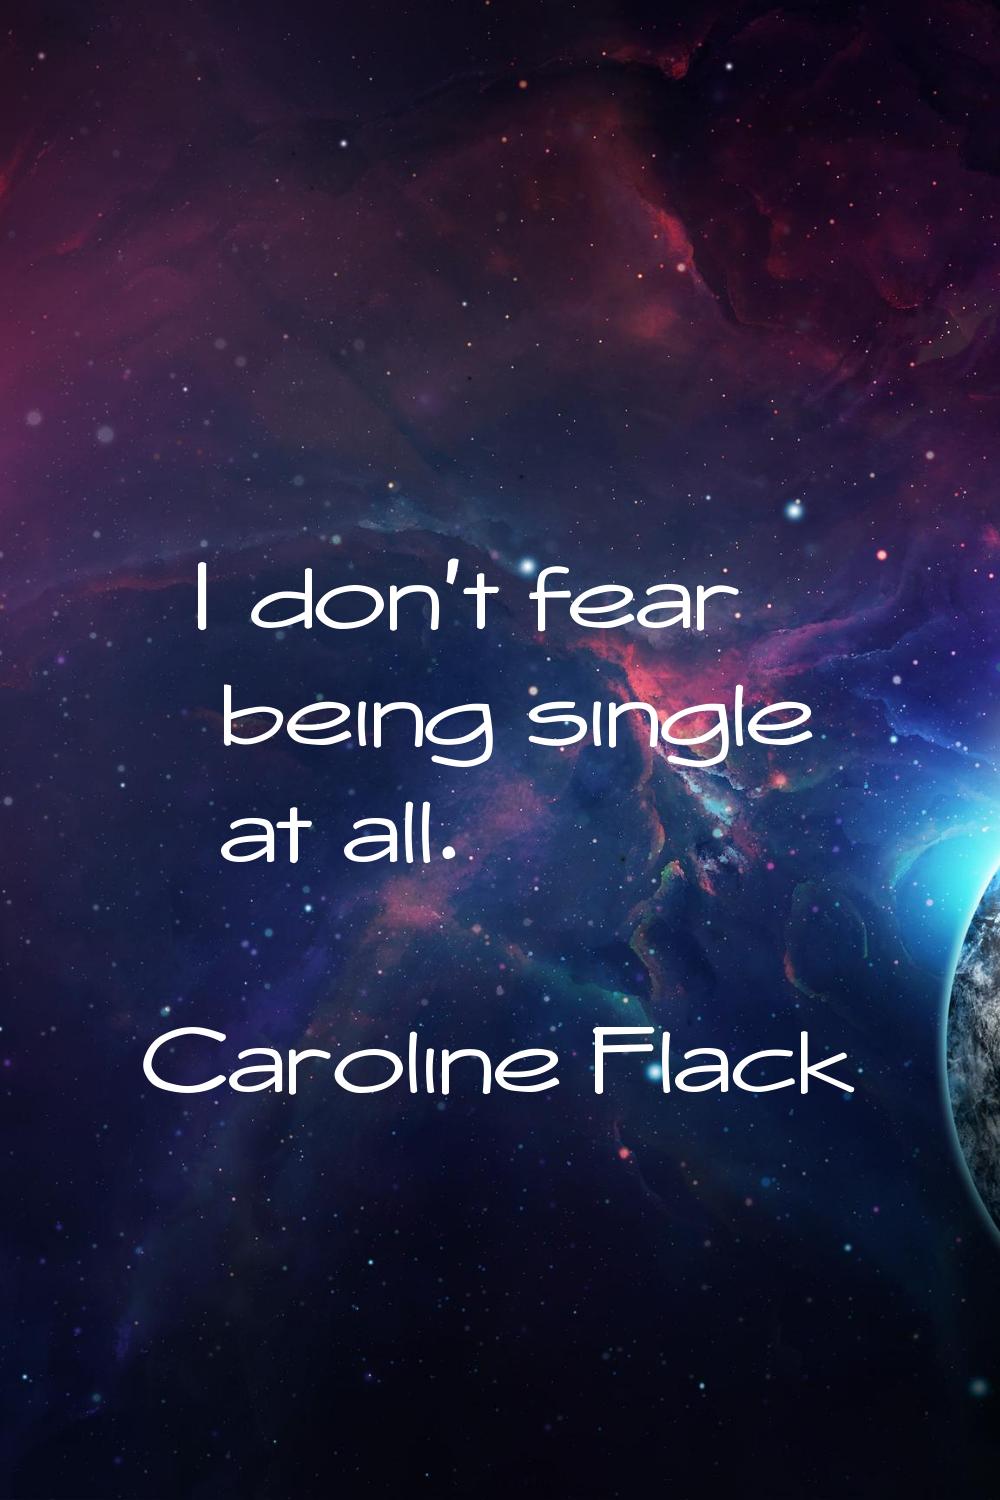 I don't fear being single at all.